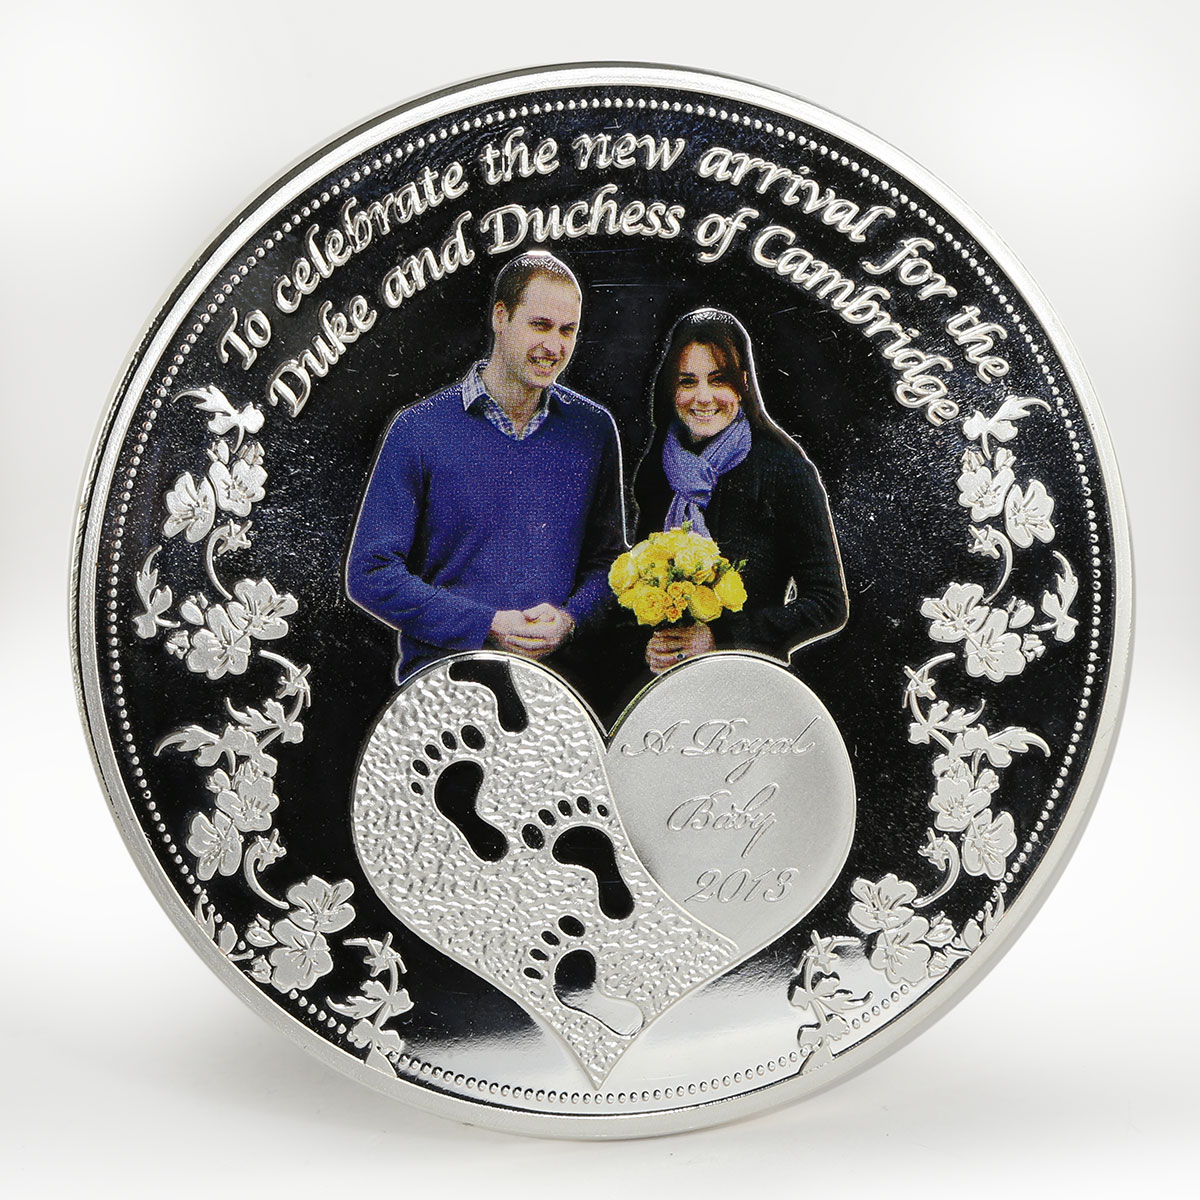 Ghana 1 cedi The Royal Baby proof color silverplated coin 2013